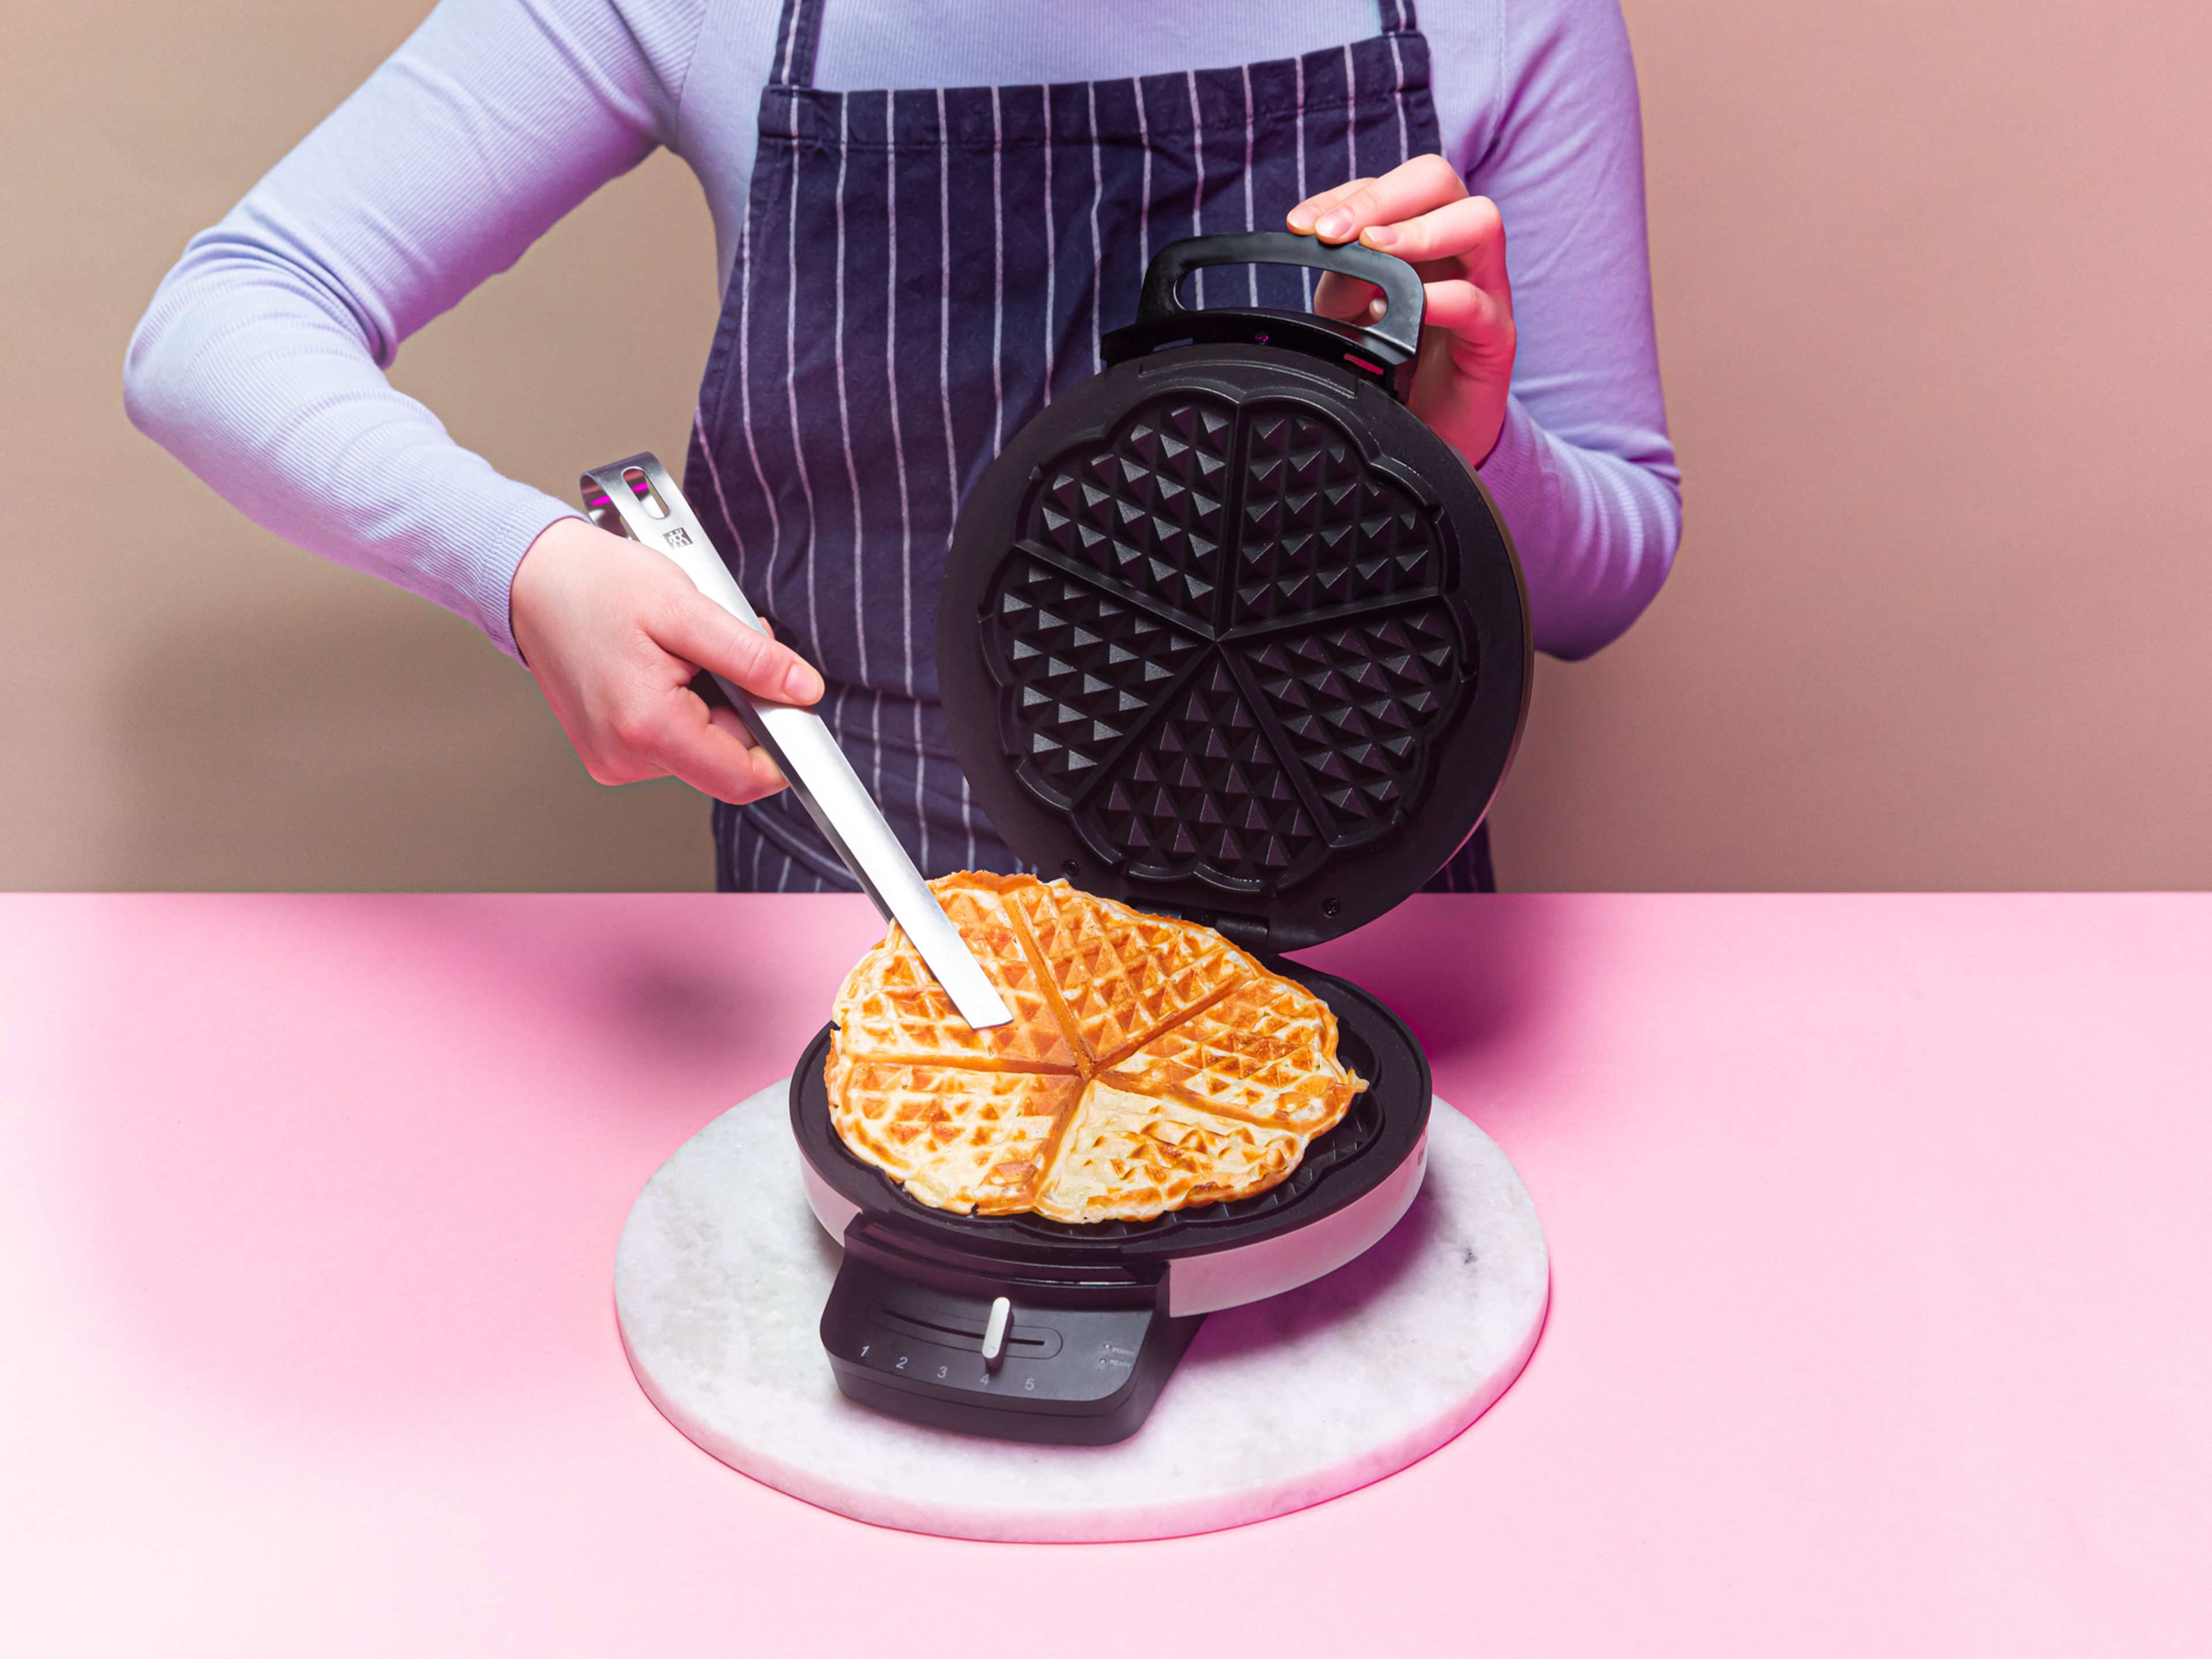 Preheat a waffle iron and lightly grease with melted butter. Fill waffle iron with batter and cook waffle until golden brown, approx. 5 min. Repeat with all the batter and transfer waffles to preheated oven to keep warm.